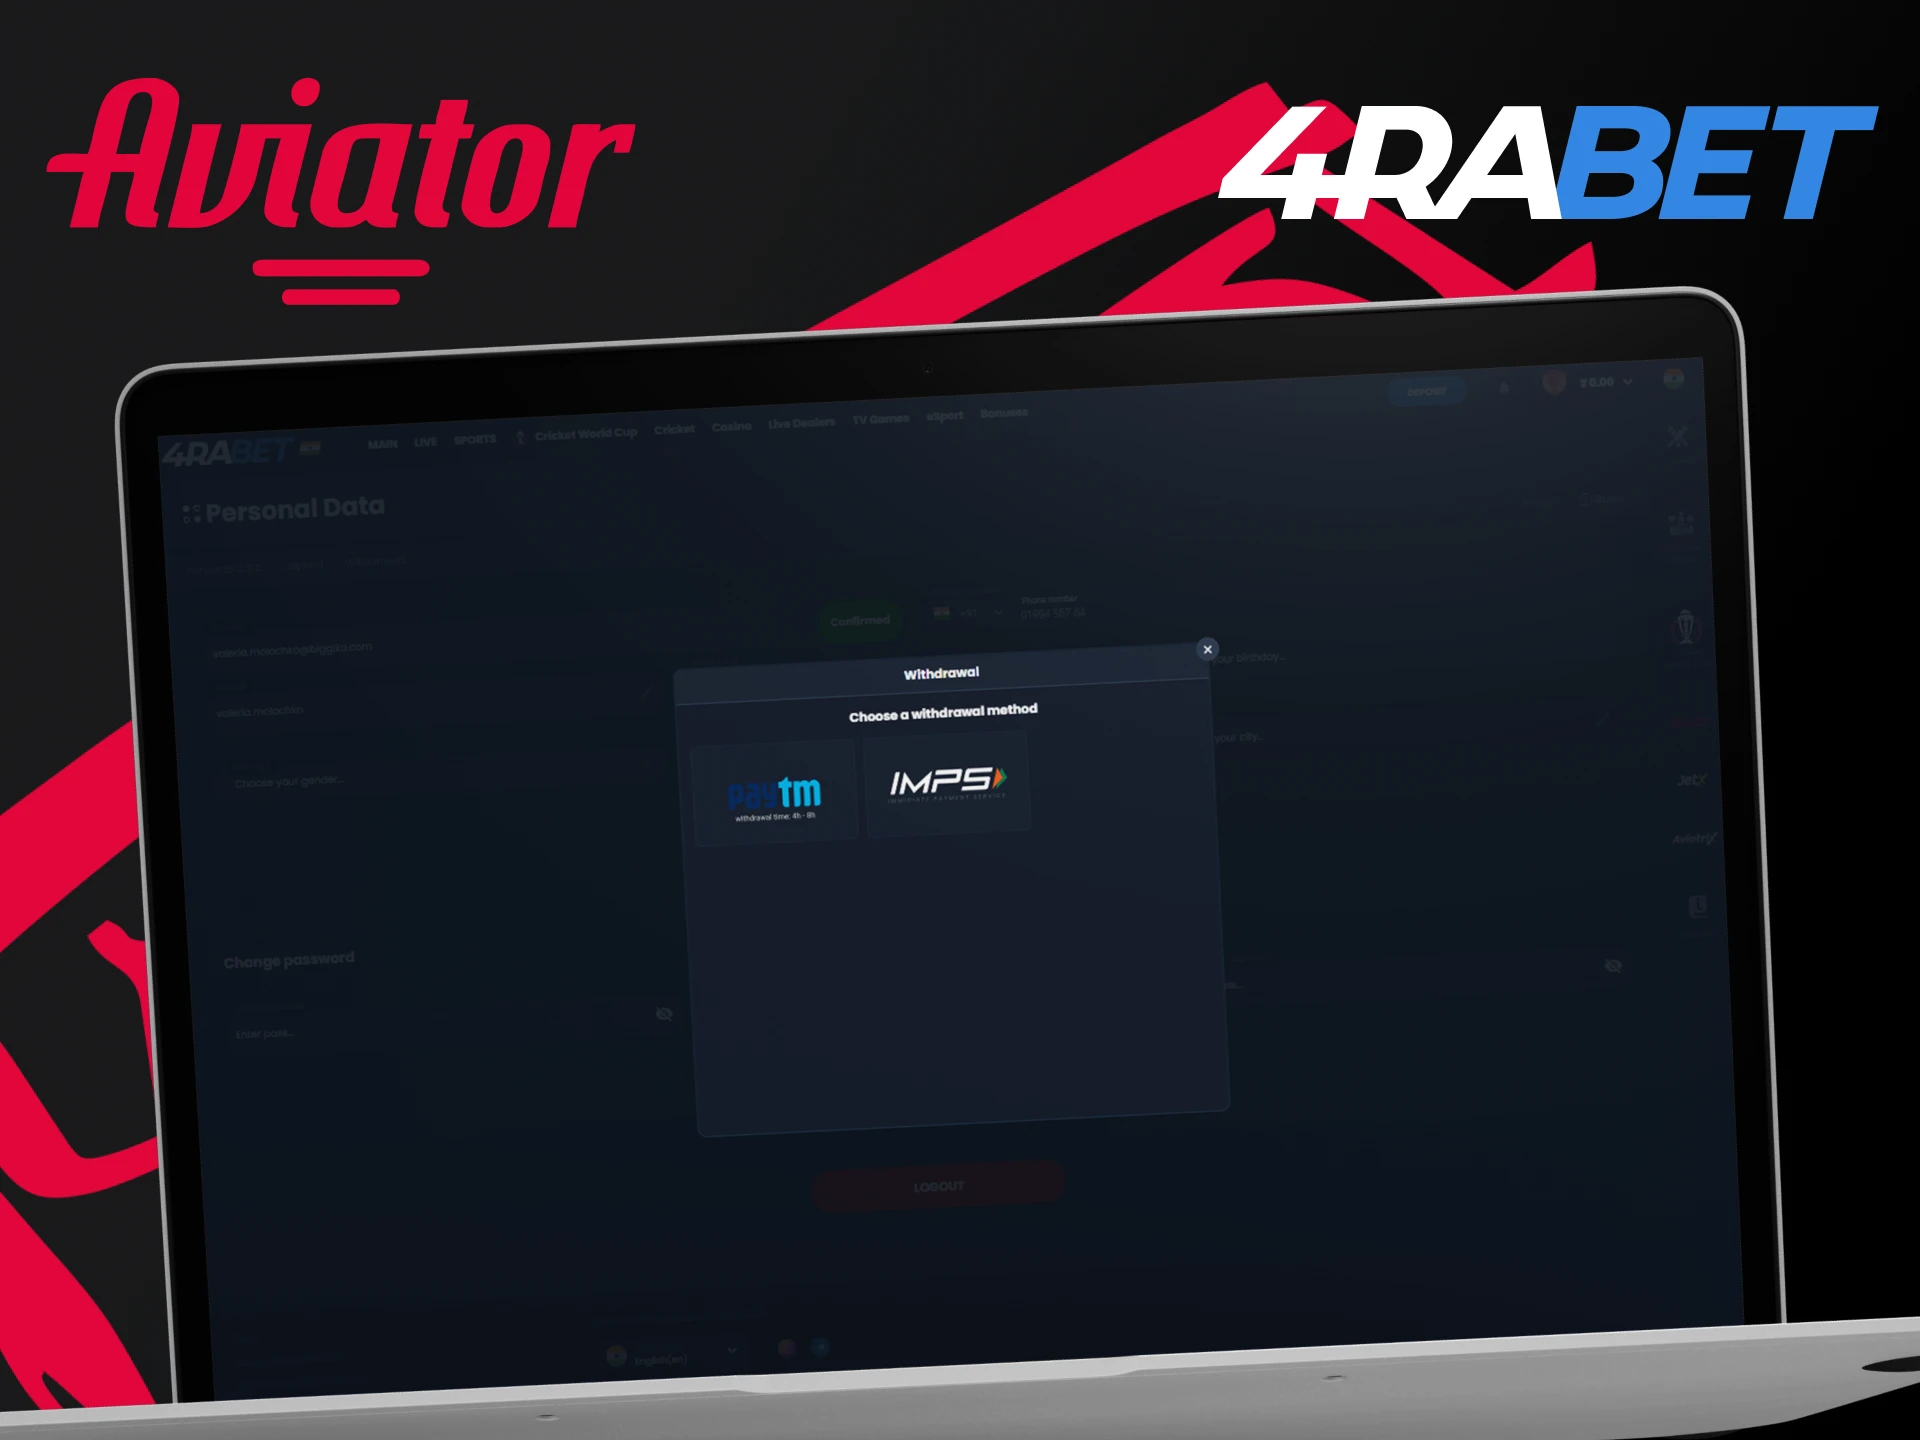 Play the Aviator game and withdraw your money with 4rabet.